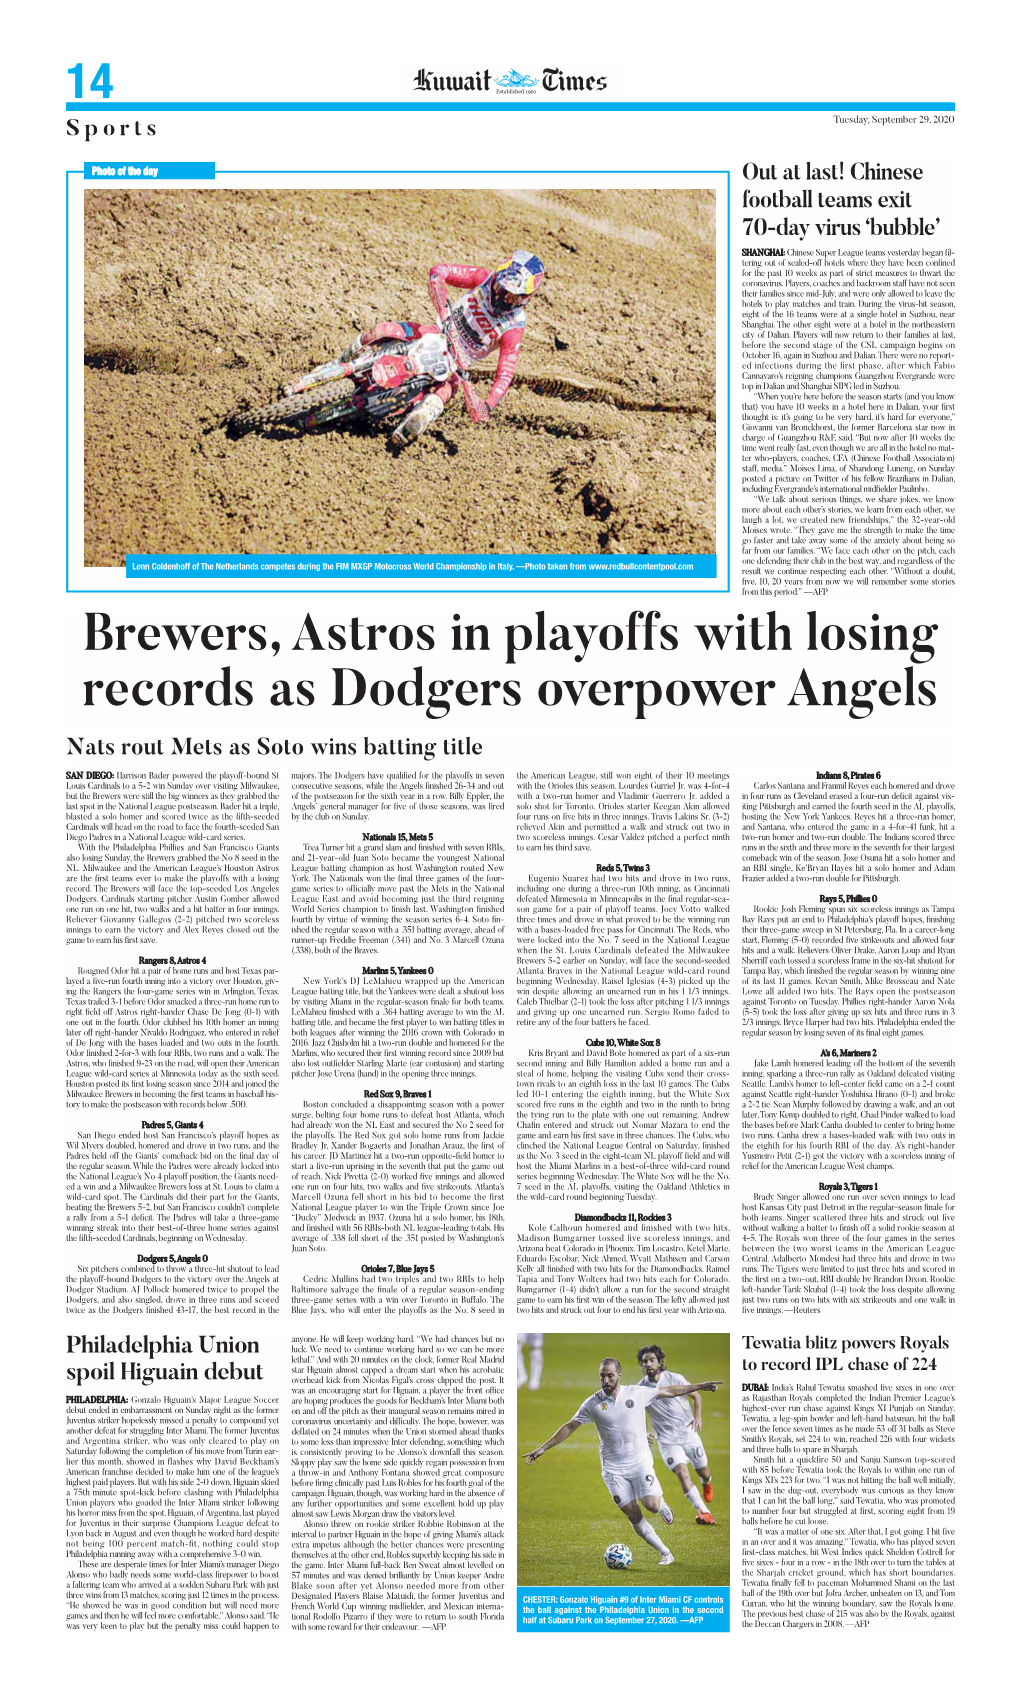 Brewers, Astros in Playoffs with Losing Records As Dodgers Overpower Angels Nats Rout Mets As Soto Wins Batting Title